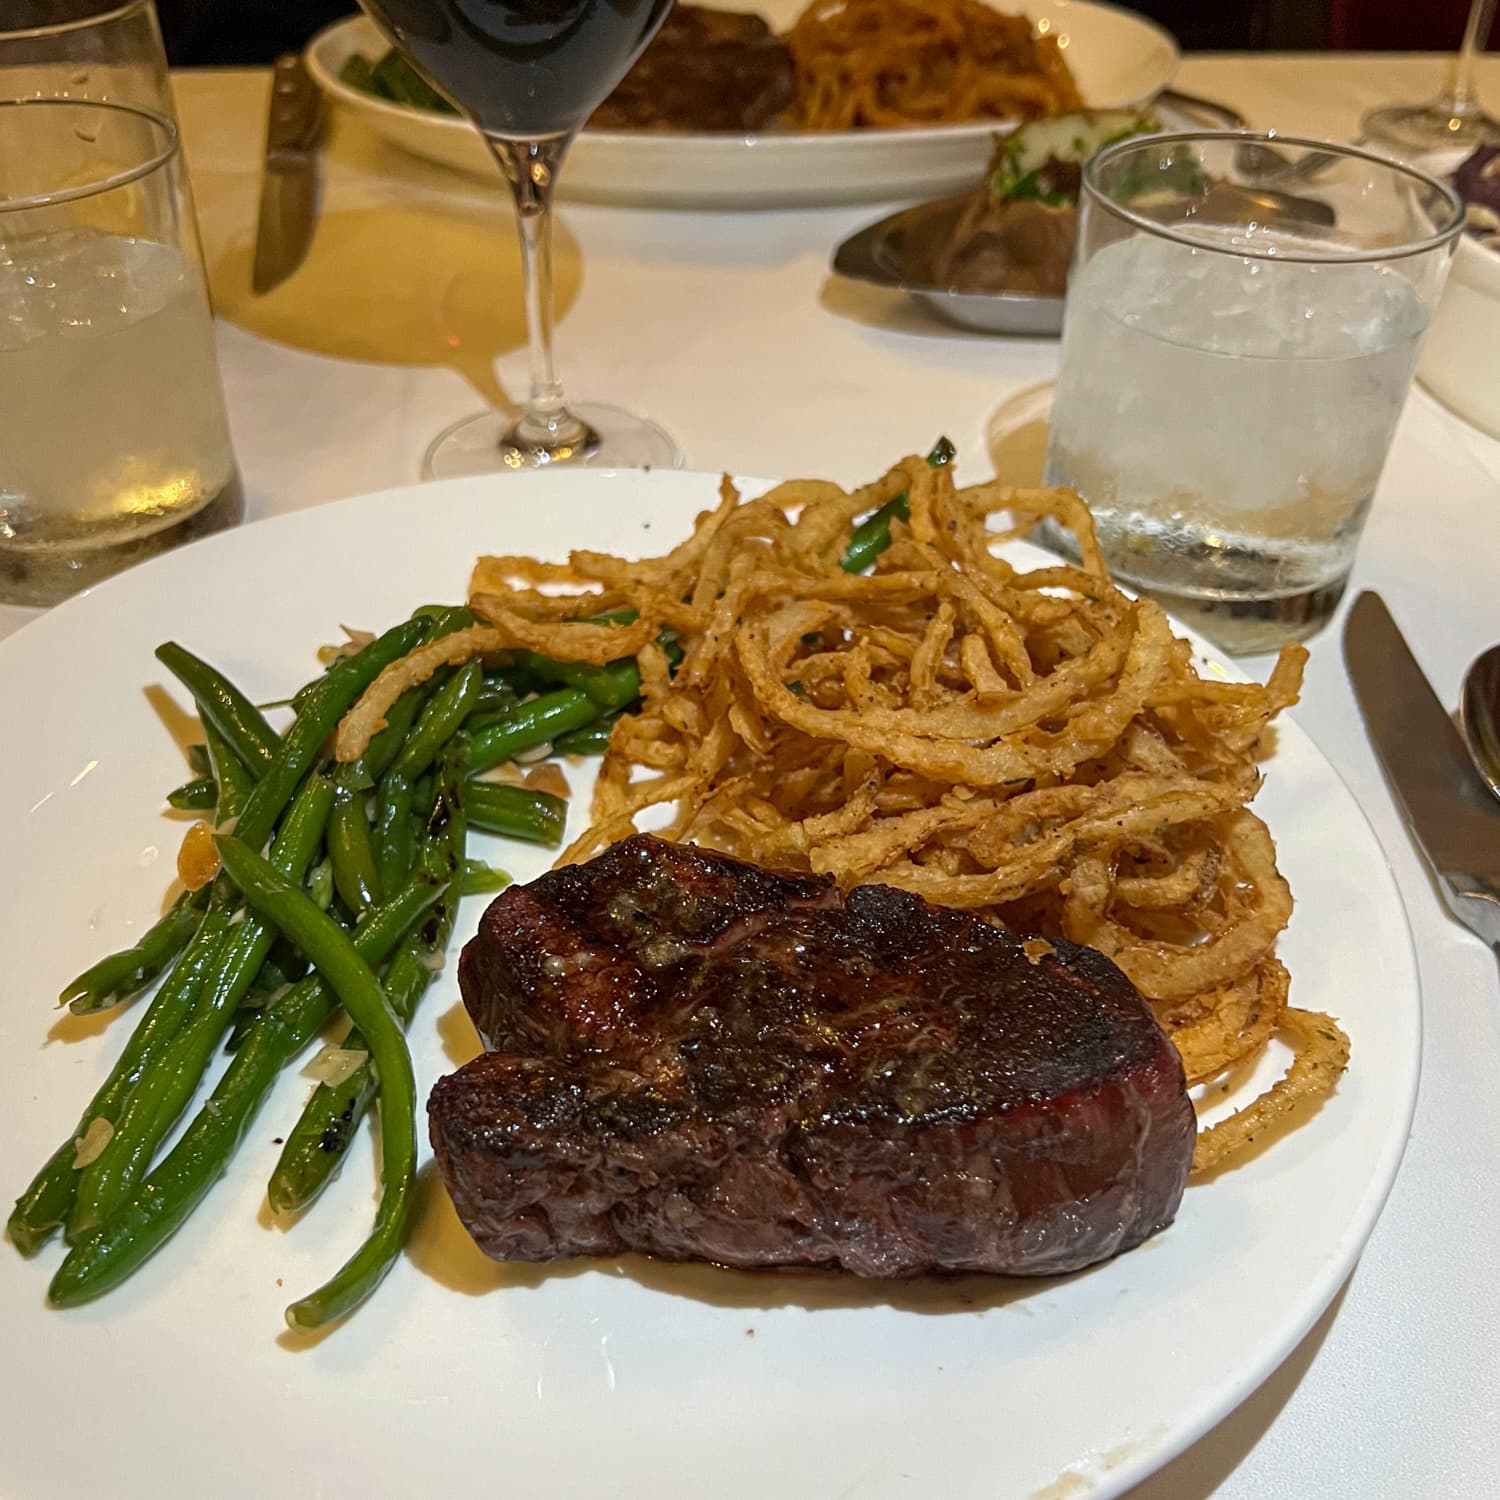 Filet mignon, onion rings, and string beans at Bern's Steak House, one of the best places to eat in Tampa, FL